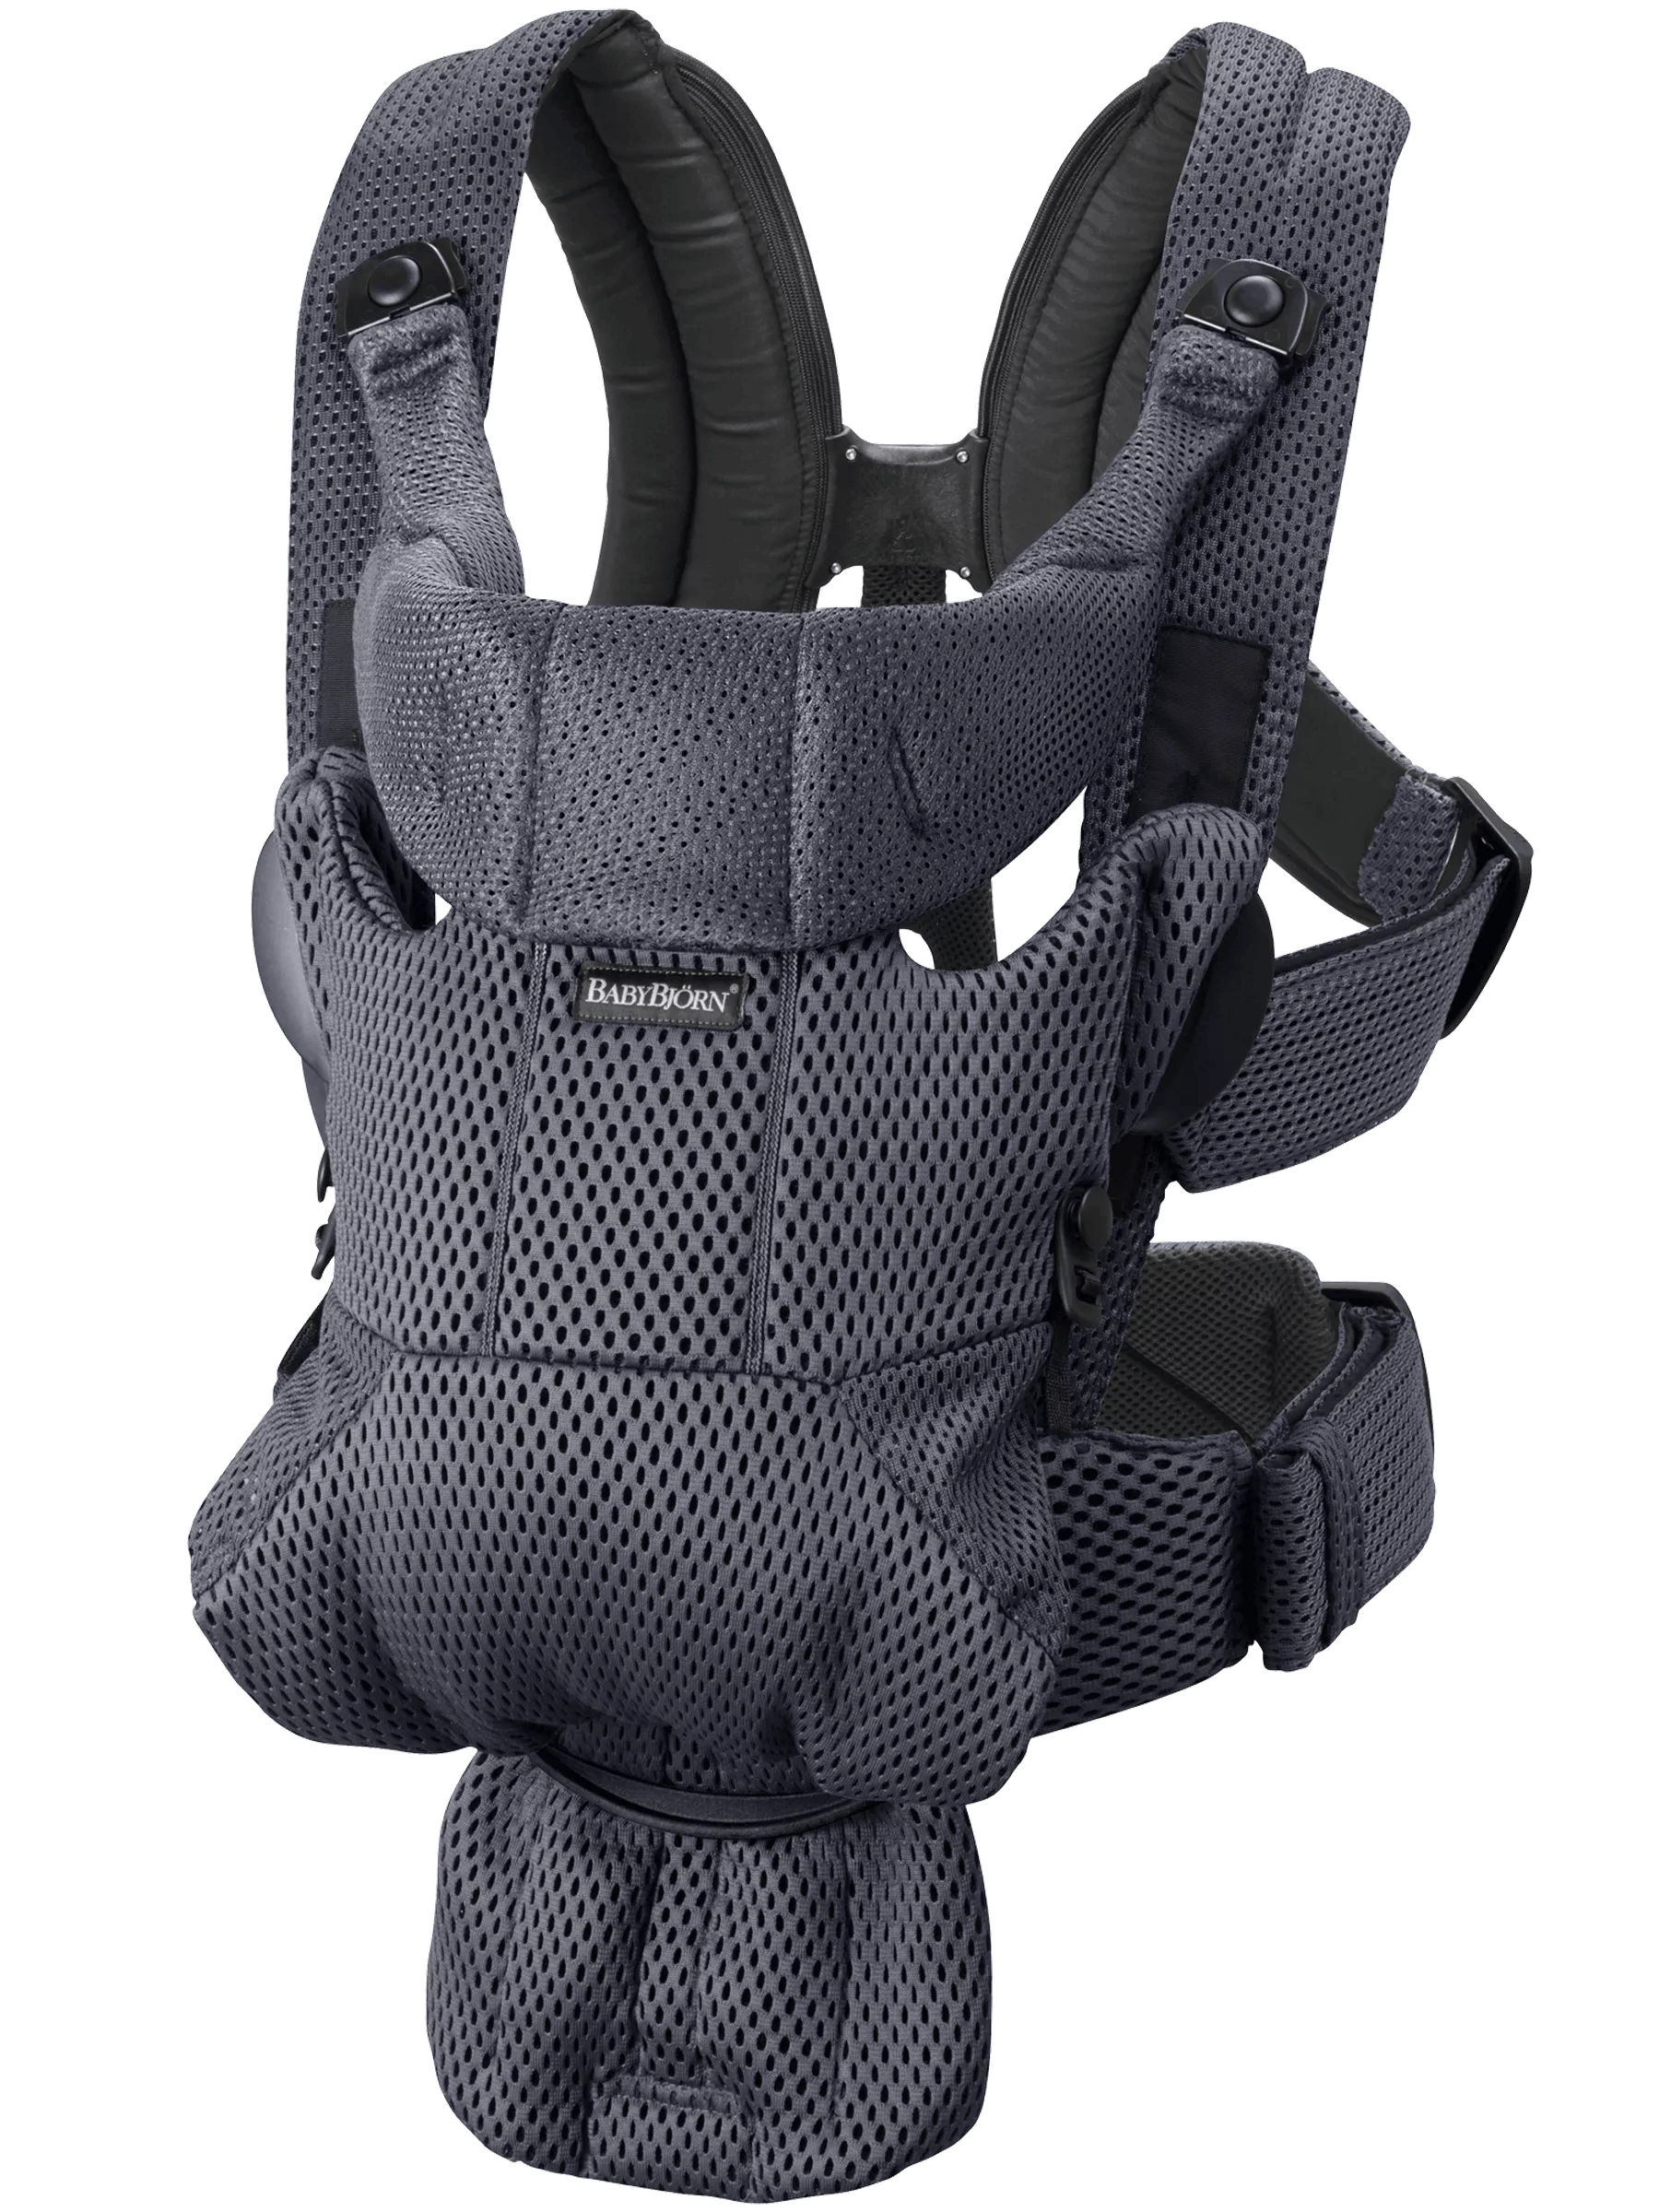 BabyBjorn Baby Carrier Free in Anthracite 3DMesh Product Image